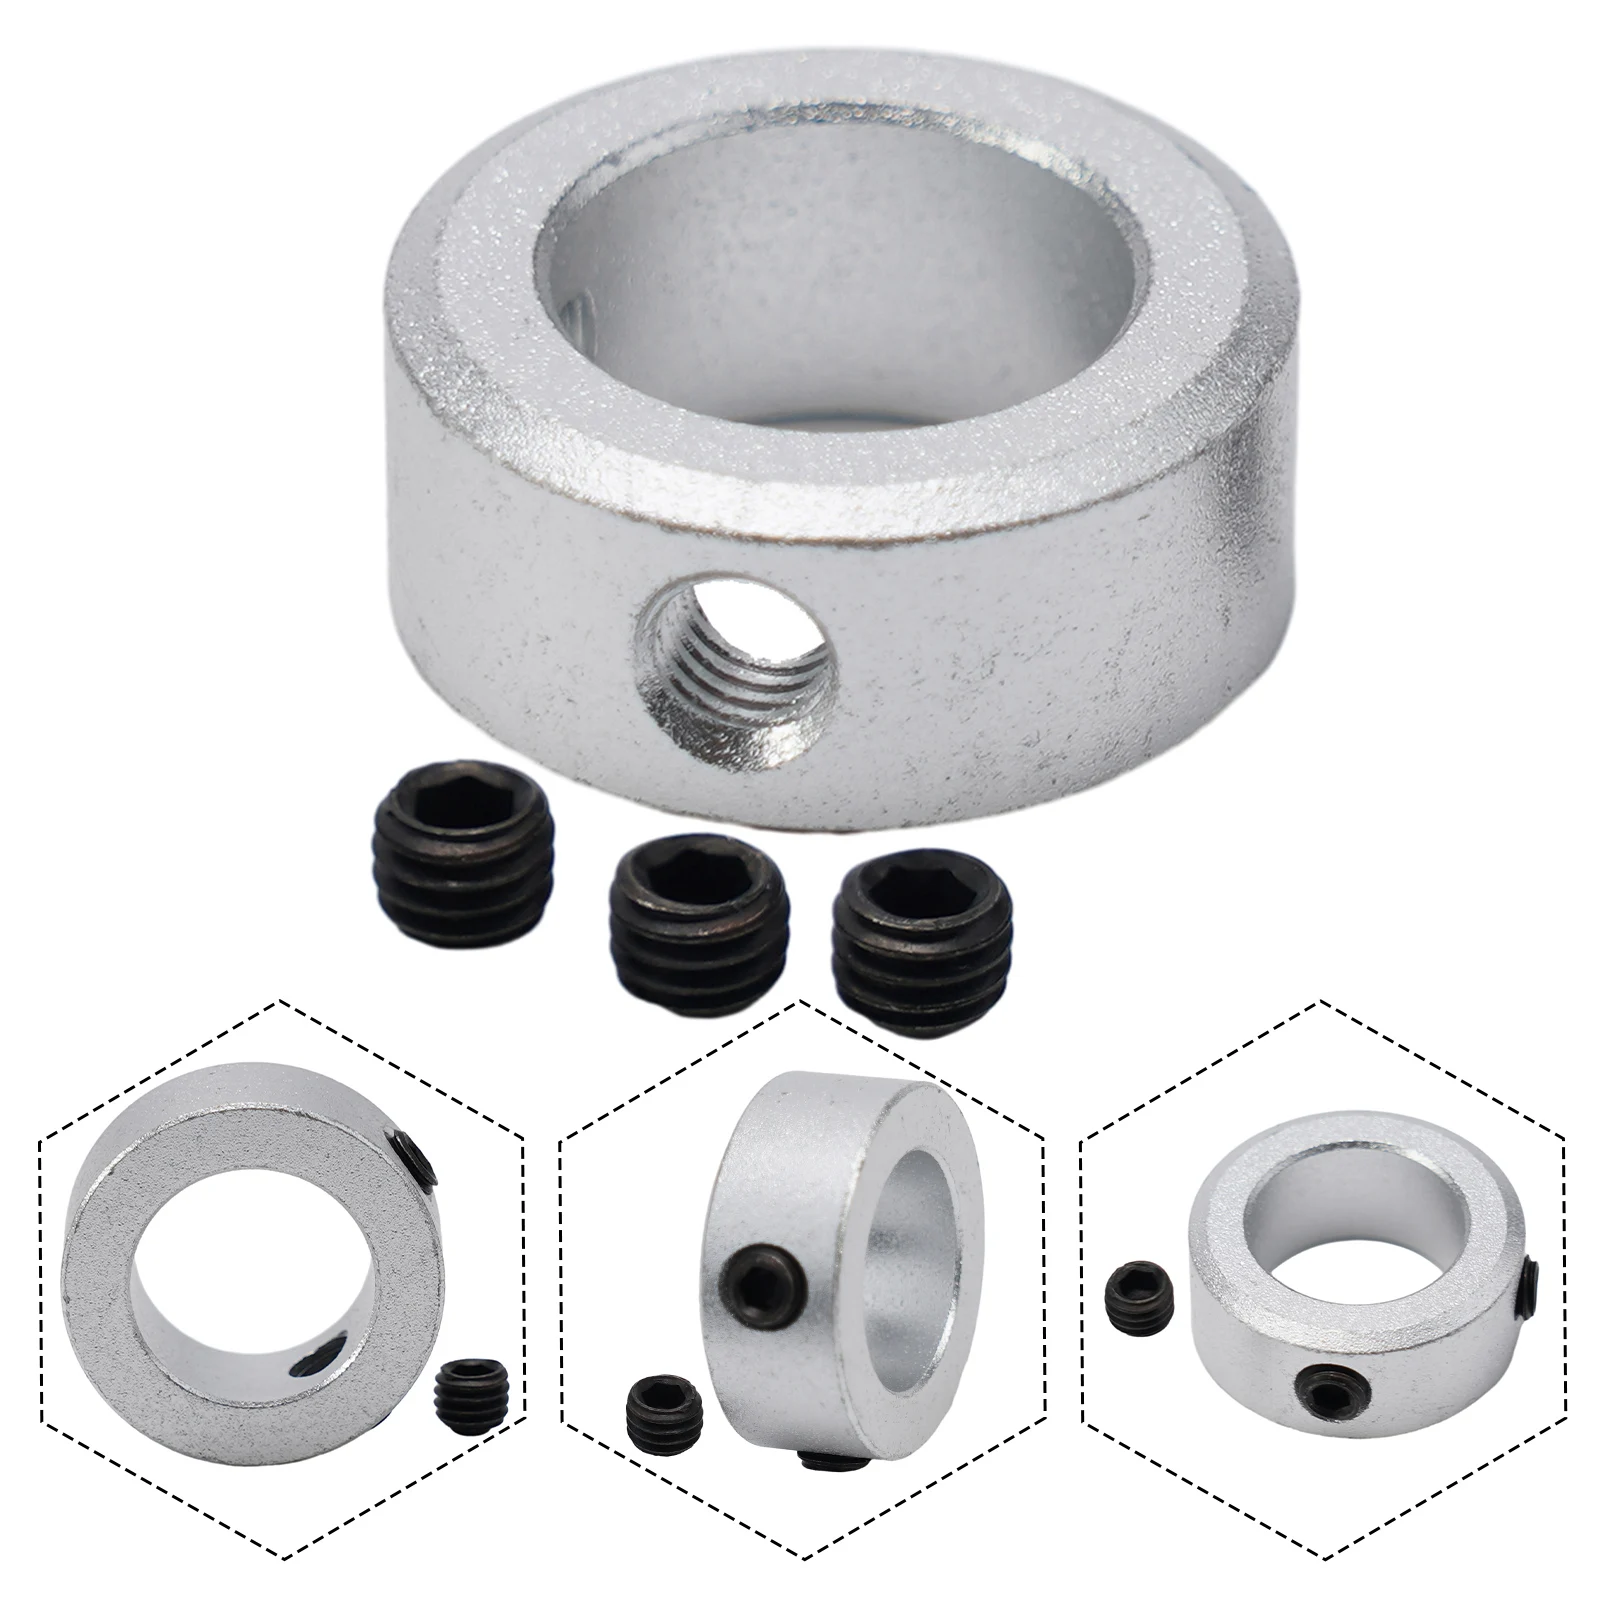 

Collar Clamp Ring Shaft Steel Steel Metric 1 Pcs 15mm-40mm Bore Clamp Eyelet Collar Interchangeable SOLID Brand New